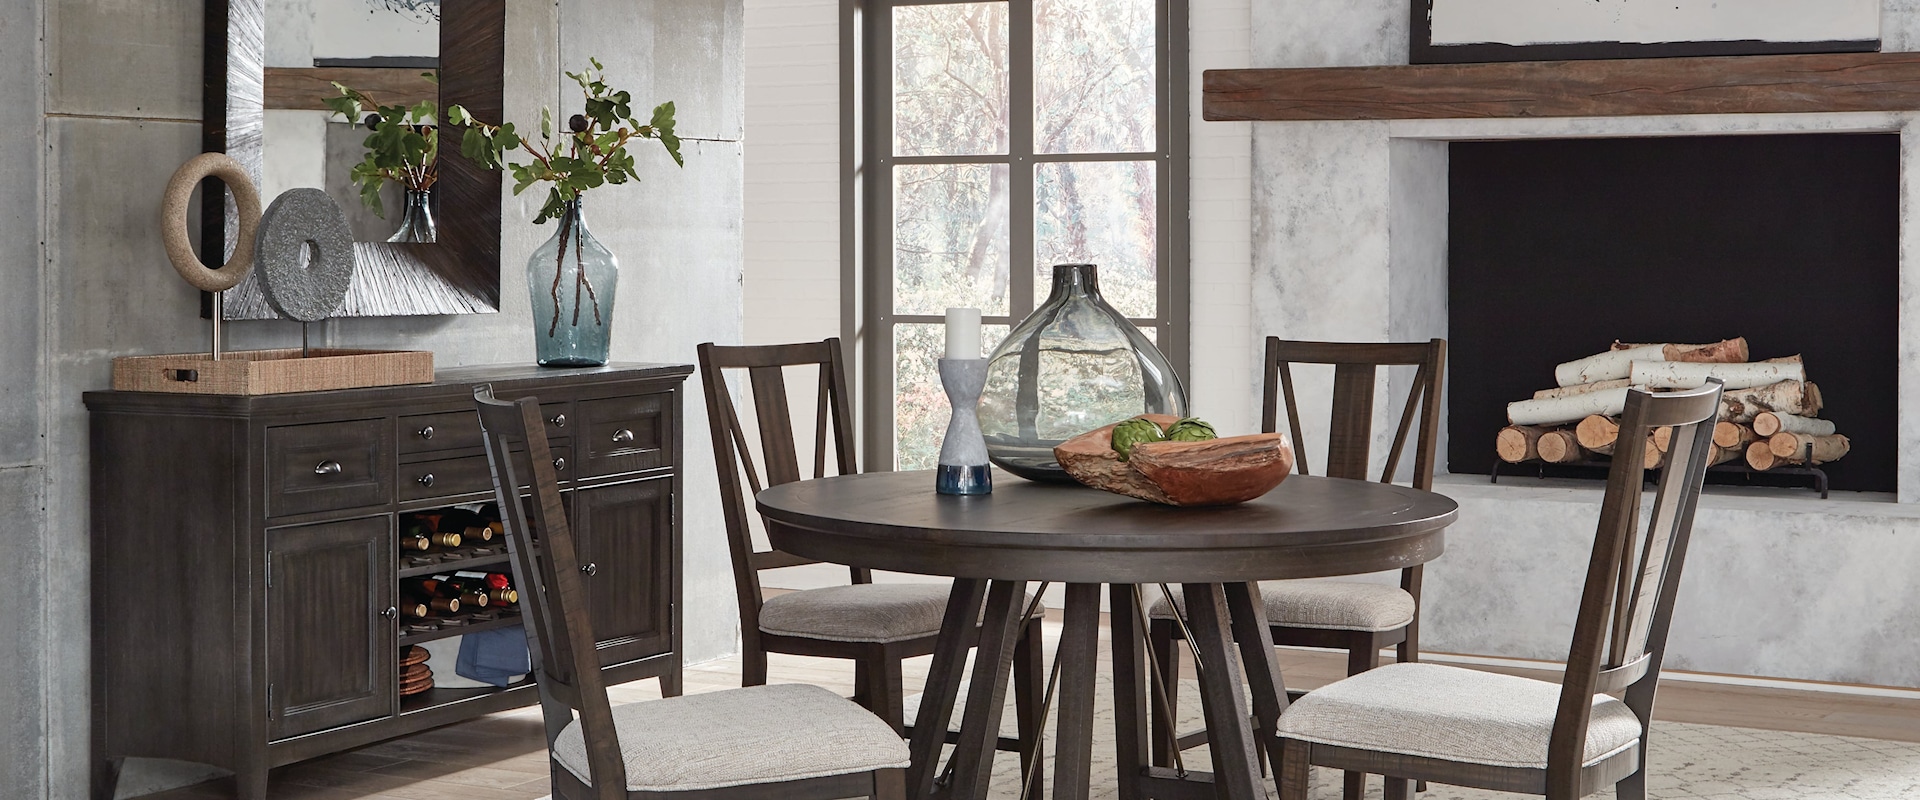 6-Piece Casual Dining Room Group